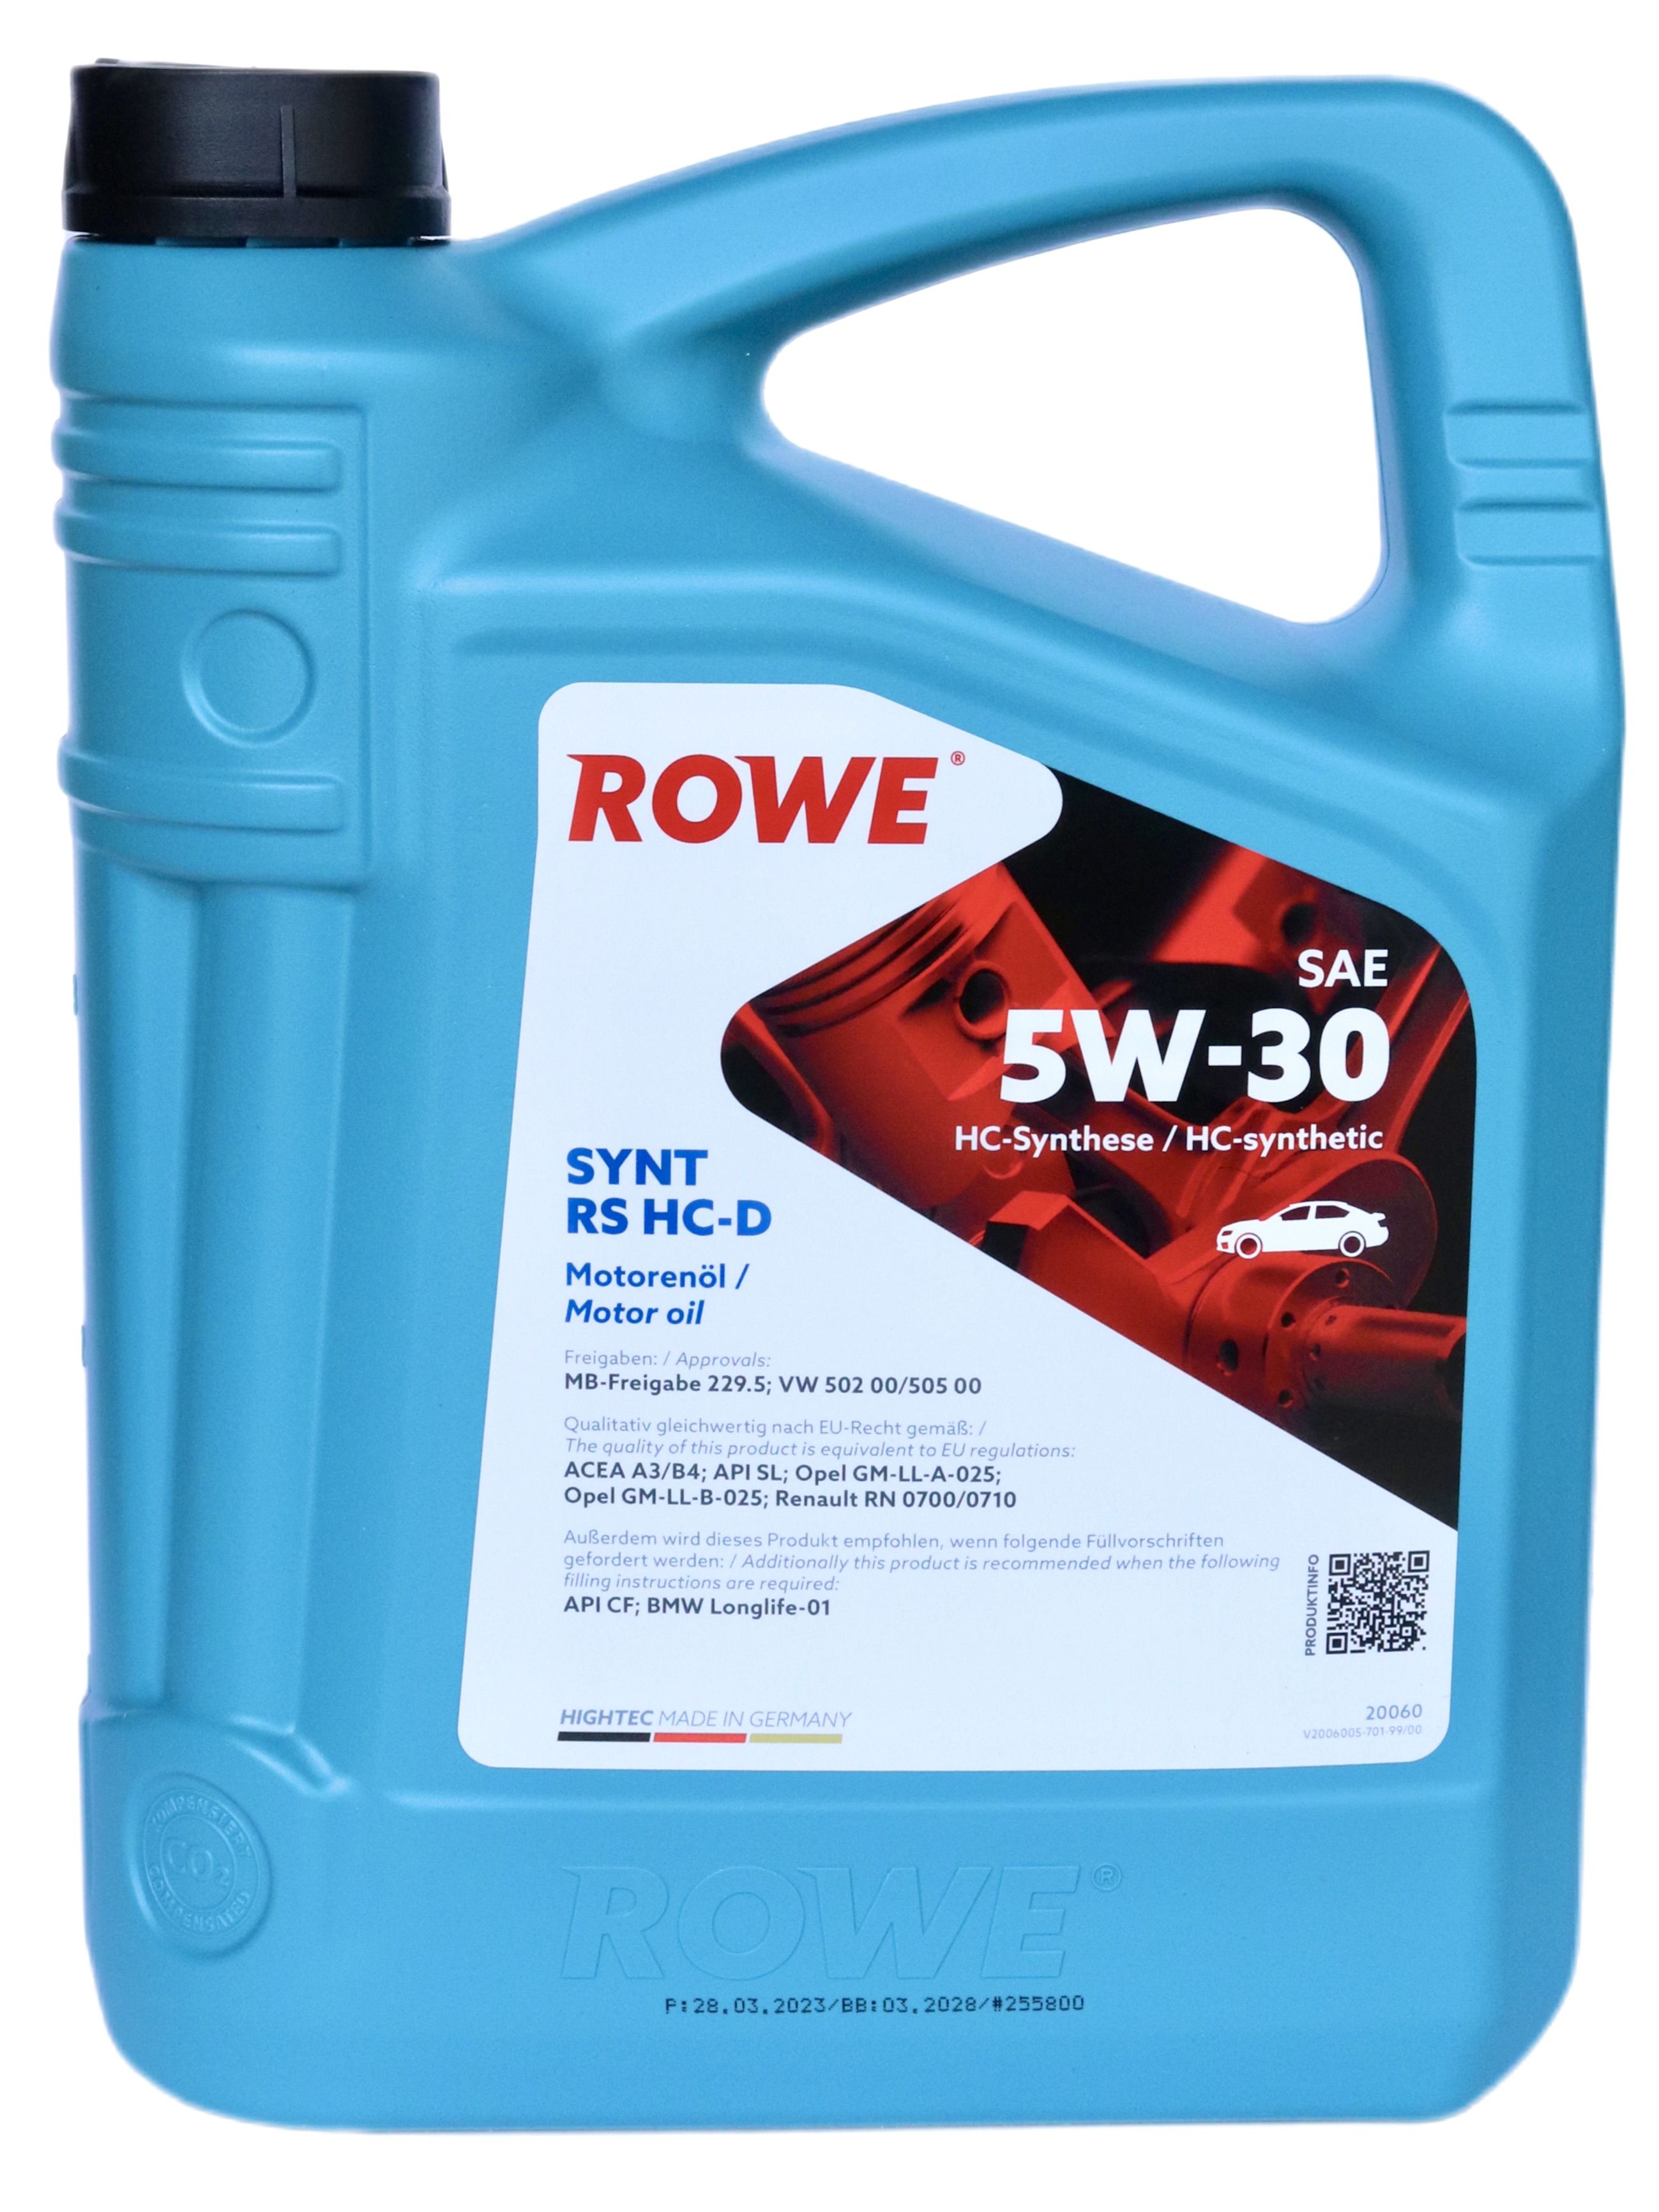 Моторное масло Rowe Hightec Multi Synt DPF SAE 5w-30. Rowe 5w30 RS DLS. Rowe DPF 5w-30 масло. Масло Rowe Hightec Synt RSI 5w40. Моторное масло rowe 5w 40